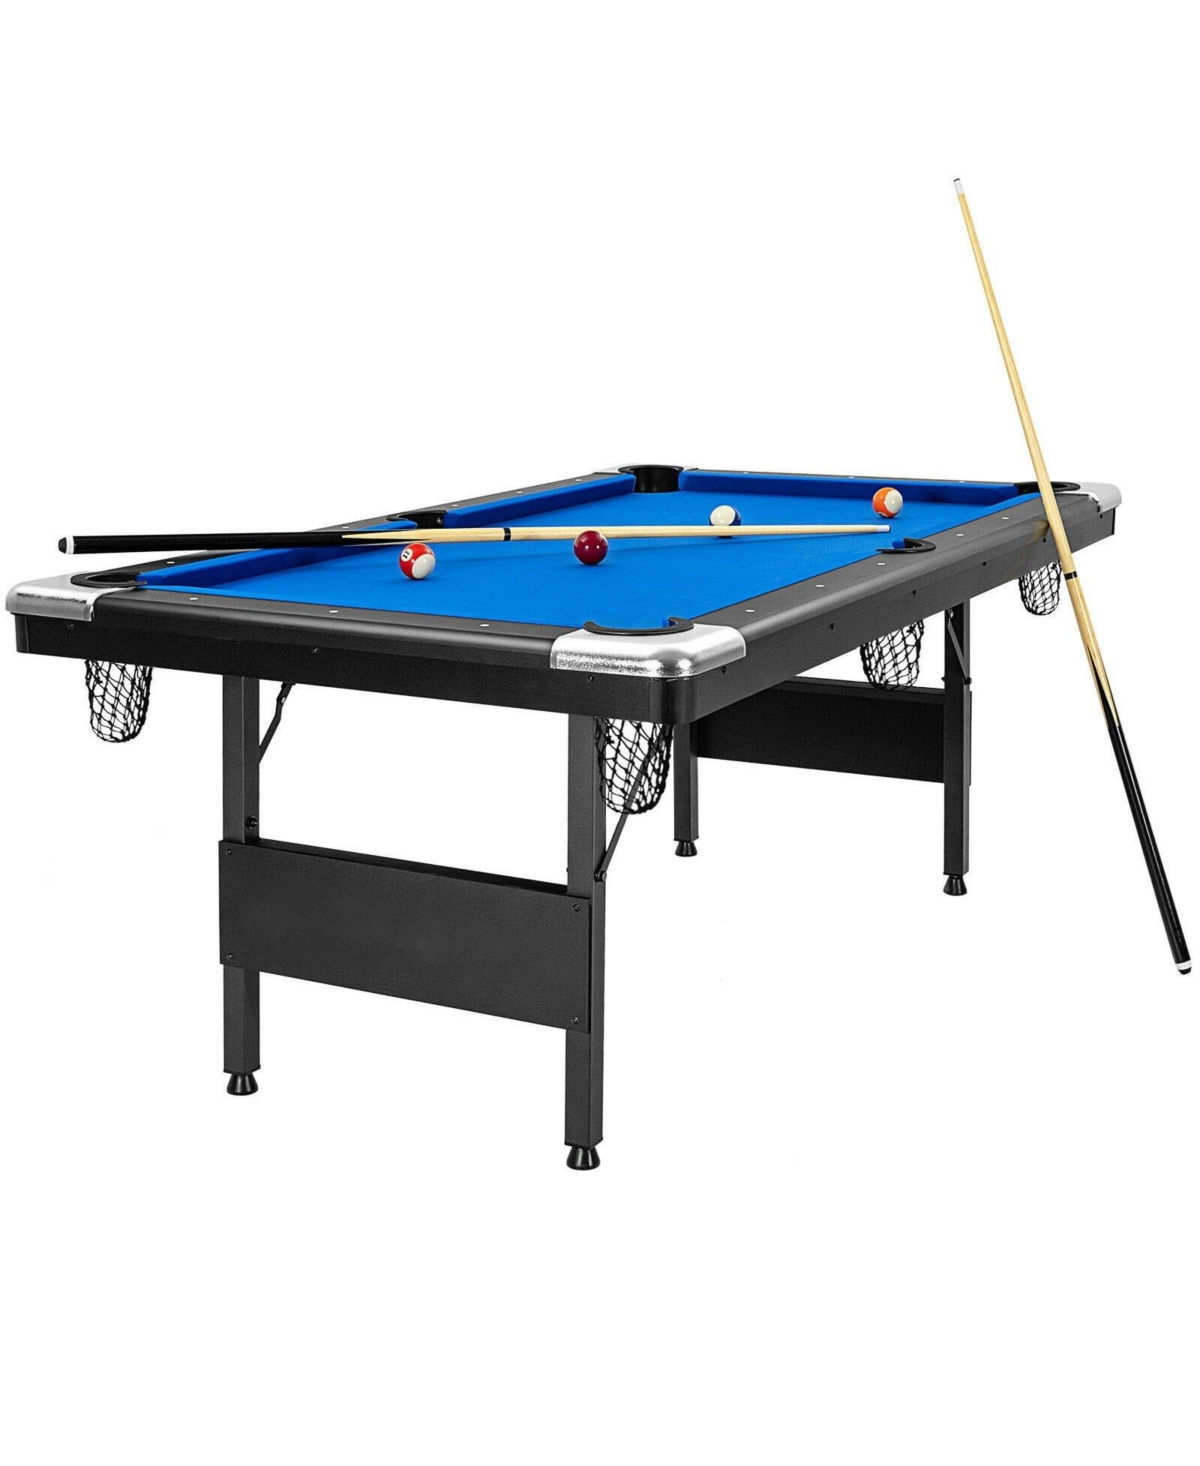 6 Feet Foldable Billiard Pool Table with Complete Set of Balls - Blue